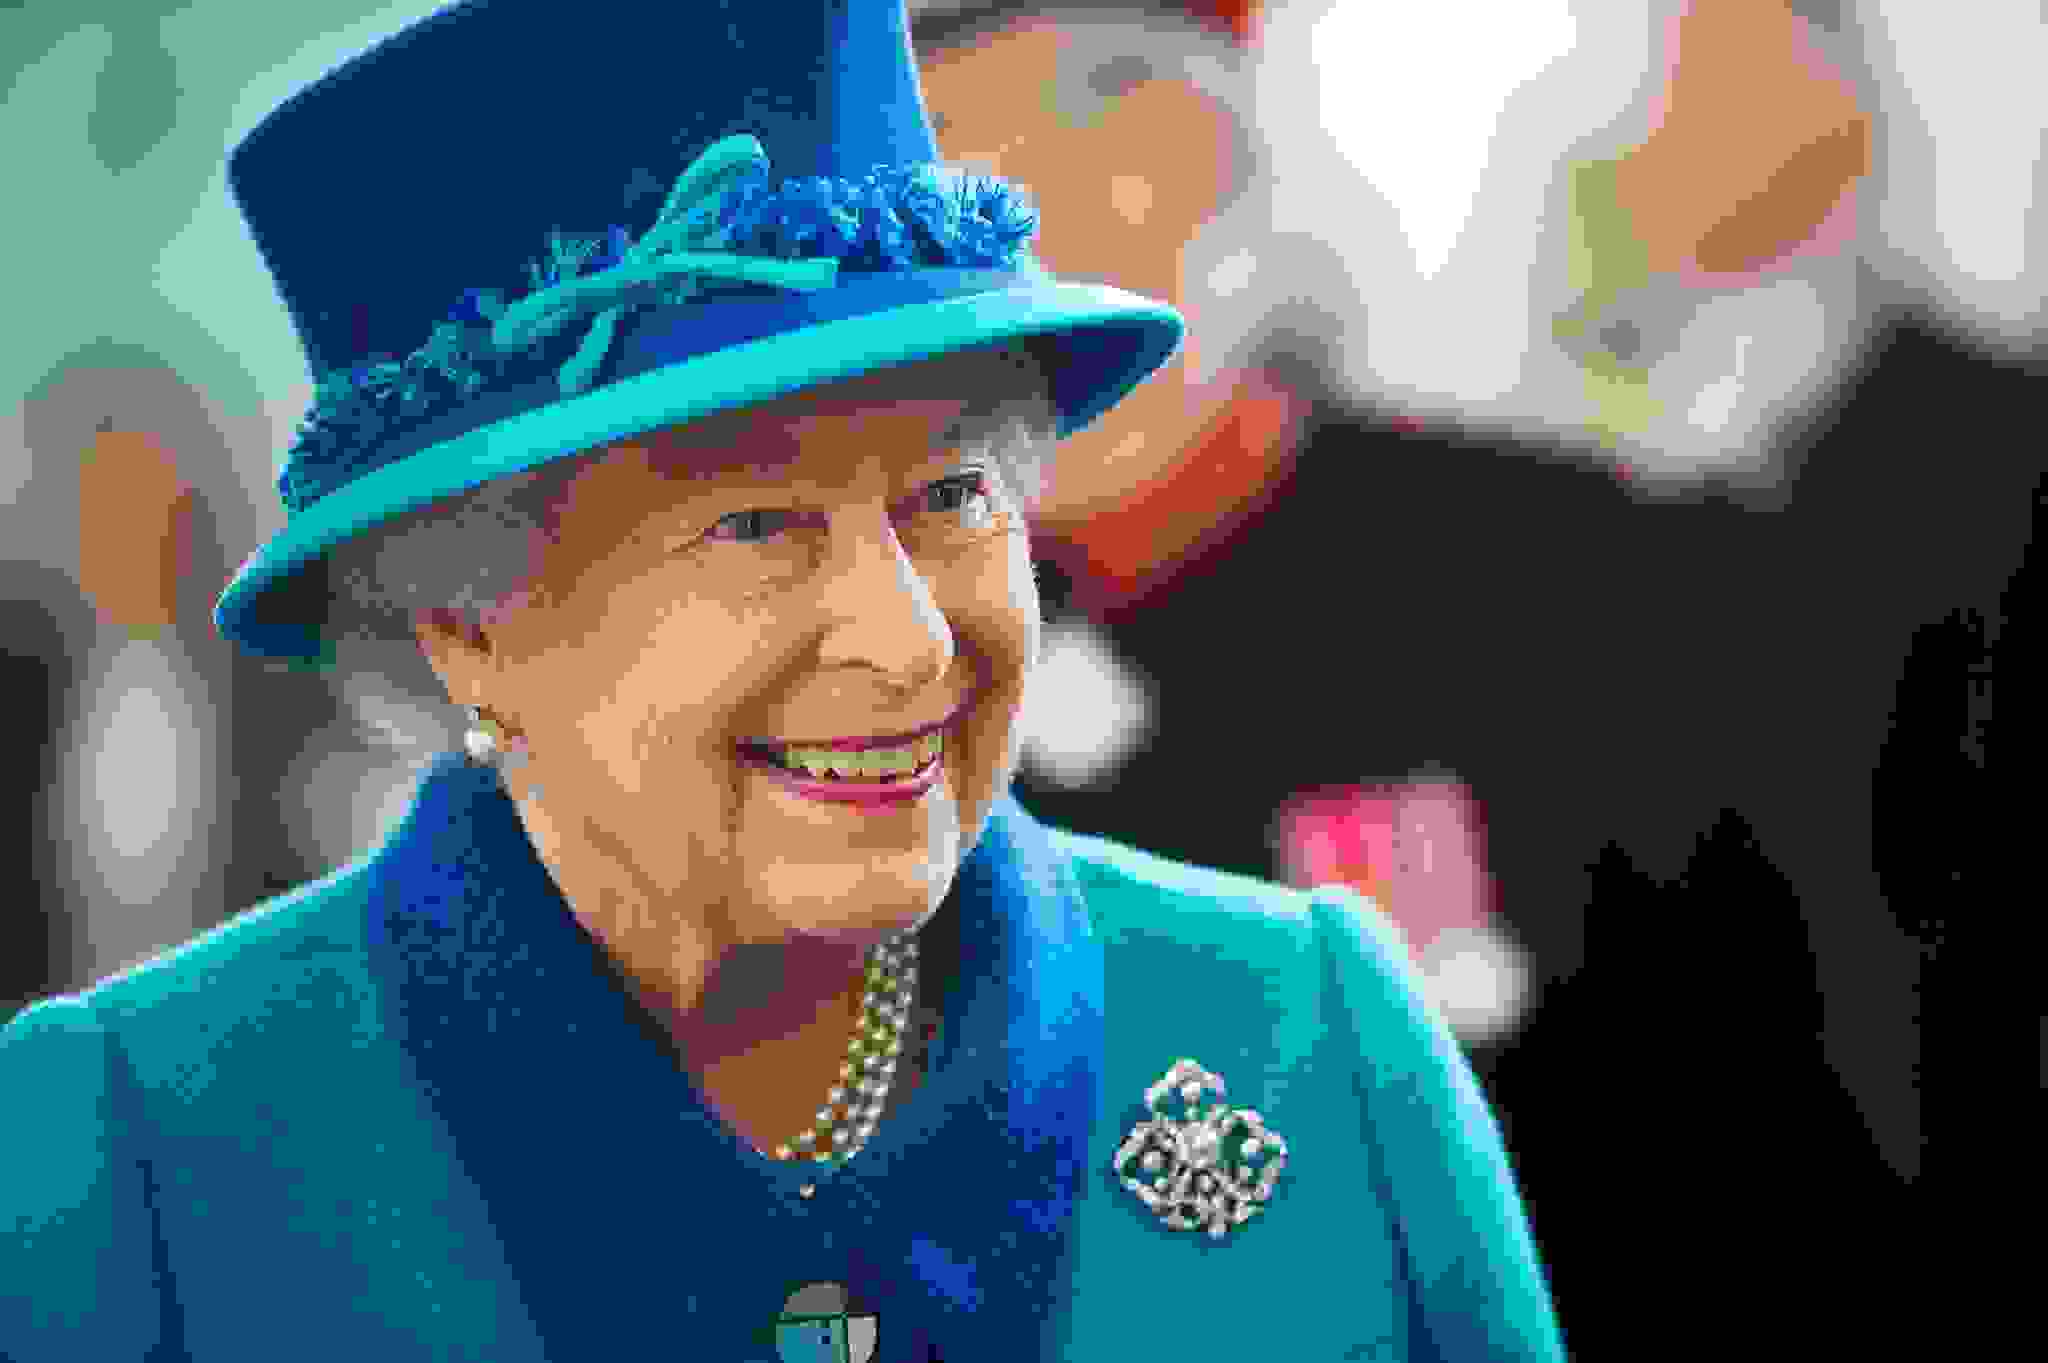 Her Majesty Queen Elizabeth ll smiling in blue coat with darker blue collar and matching hat